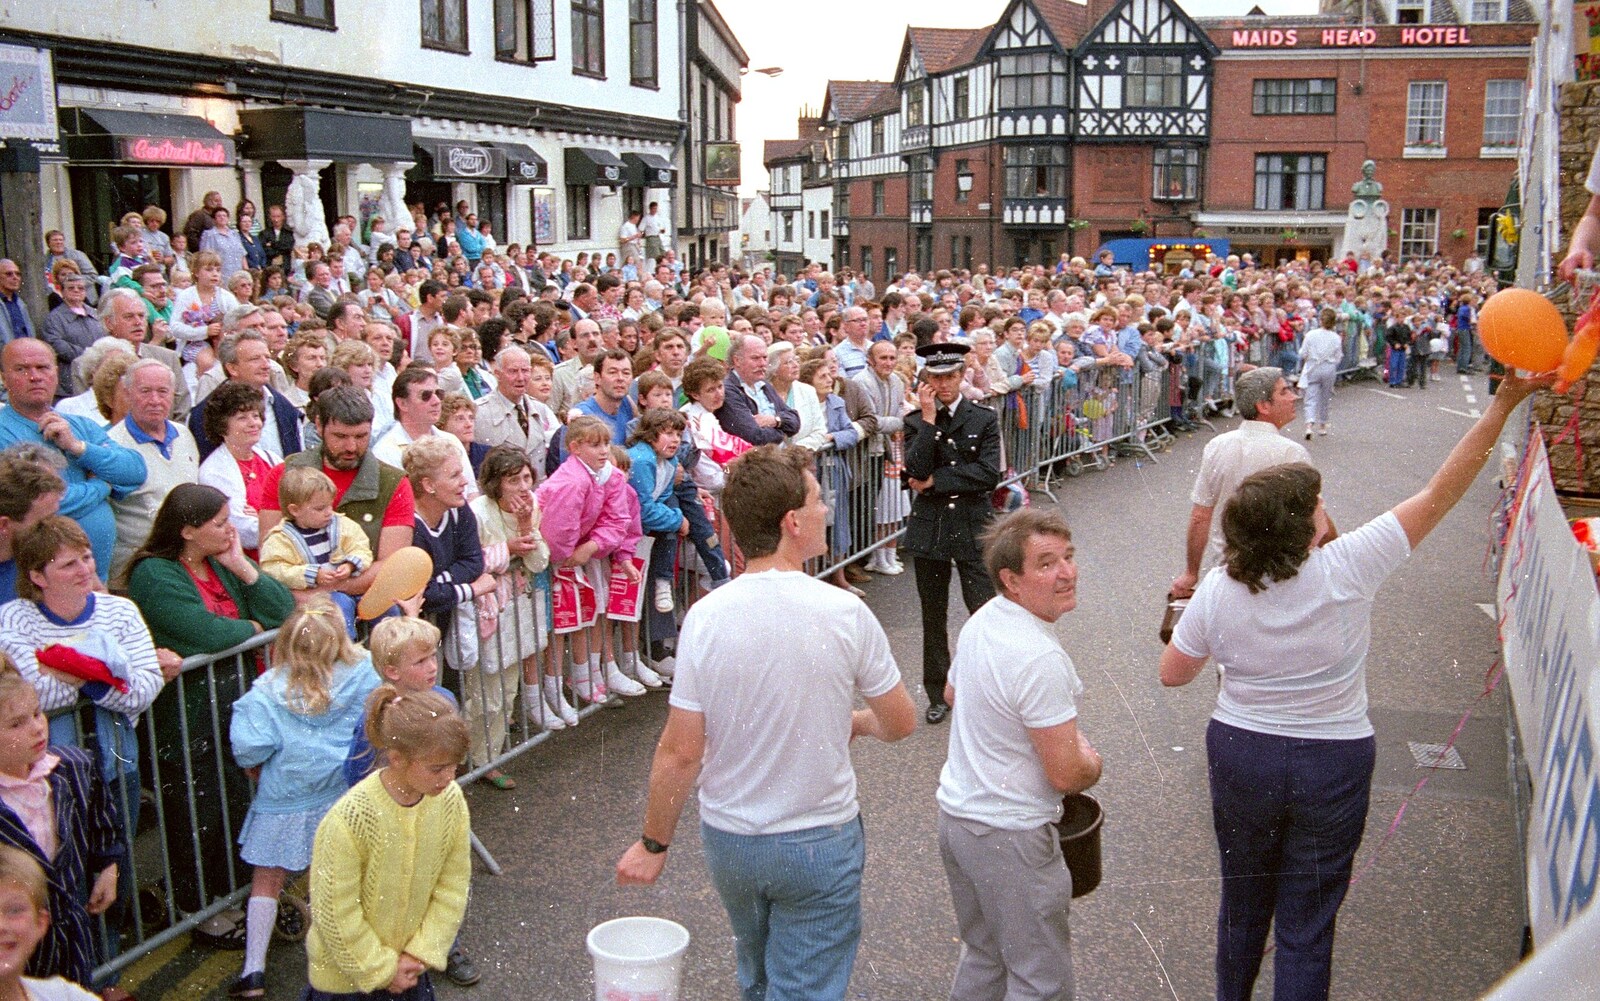 Throngs of people near the Maids Head from Soman-Wherry and the Lord Mayor's Parade, Norwich - 3rd May 1988